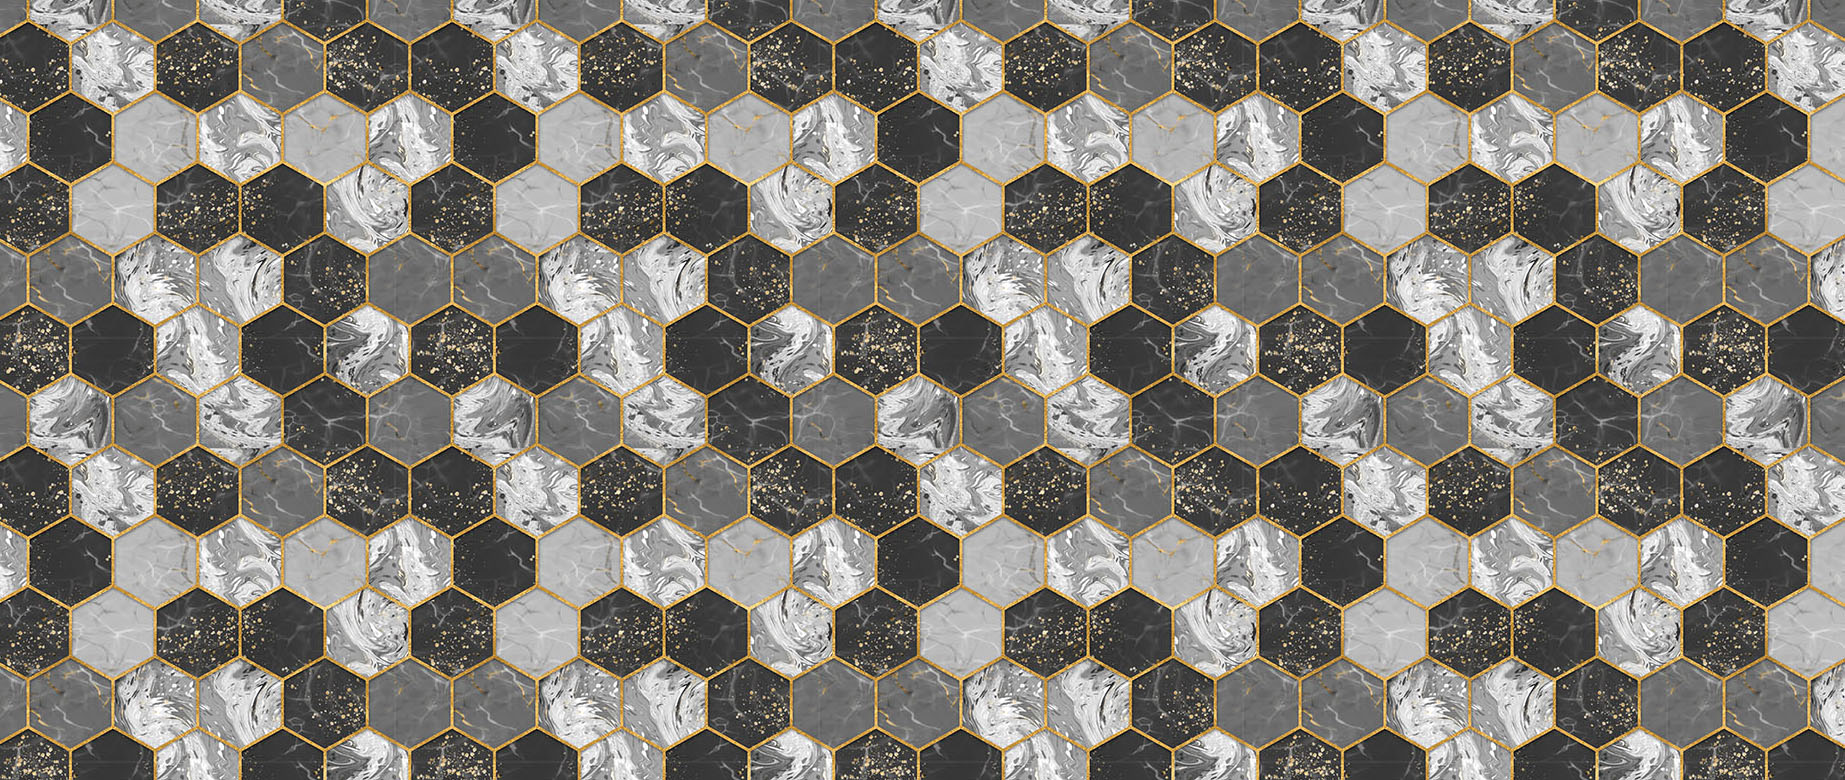 honeycomb-marble-with-golden-edges-wallpaper-seamless-repeat-view